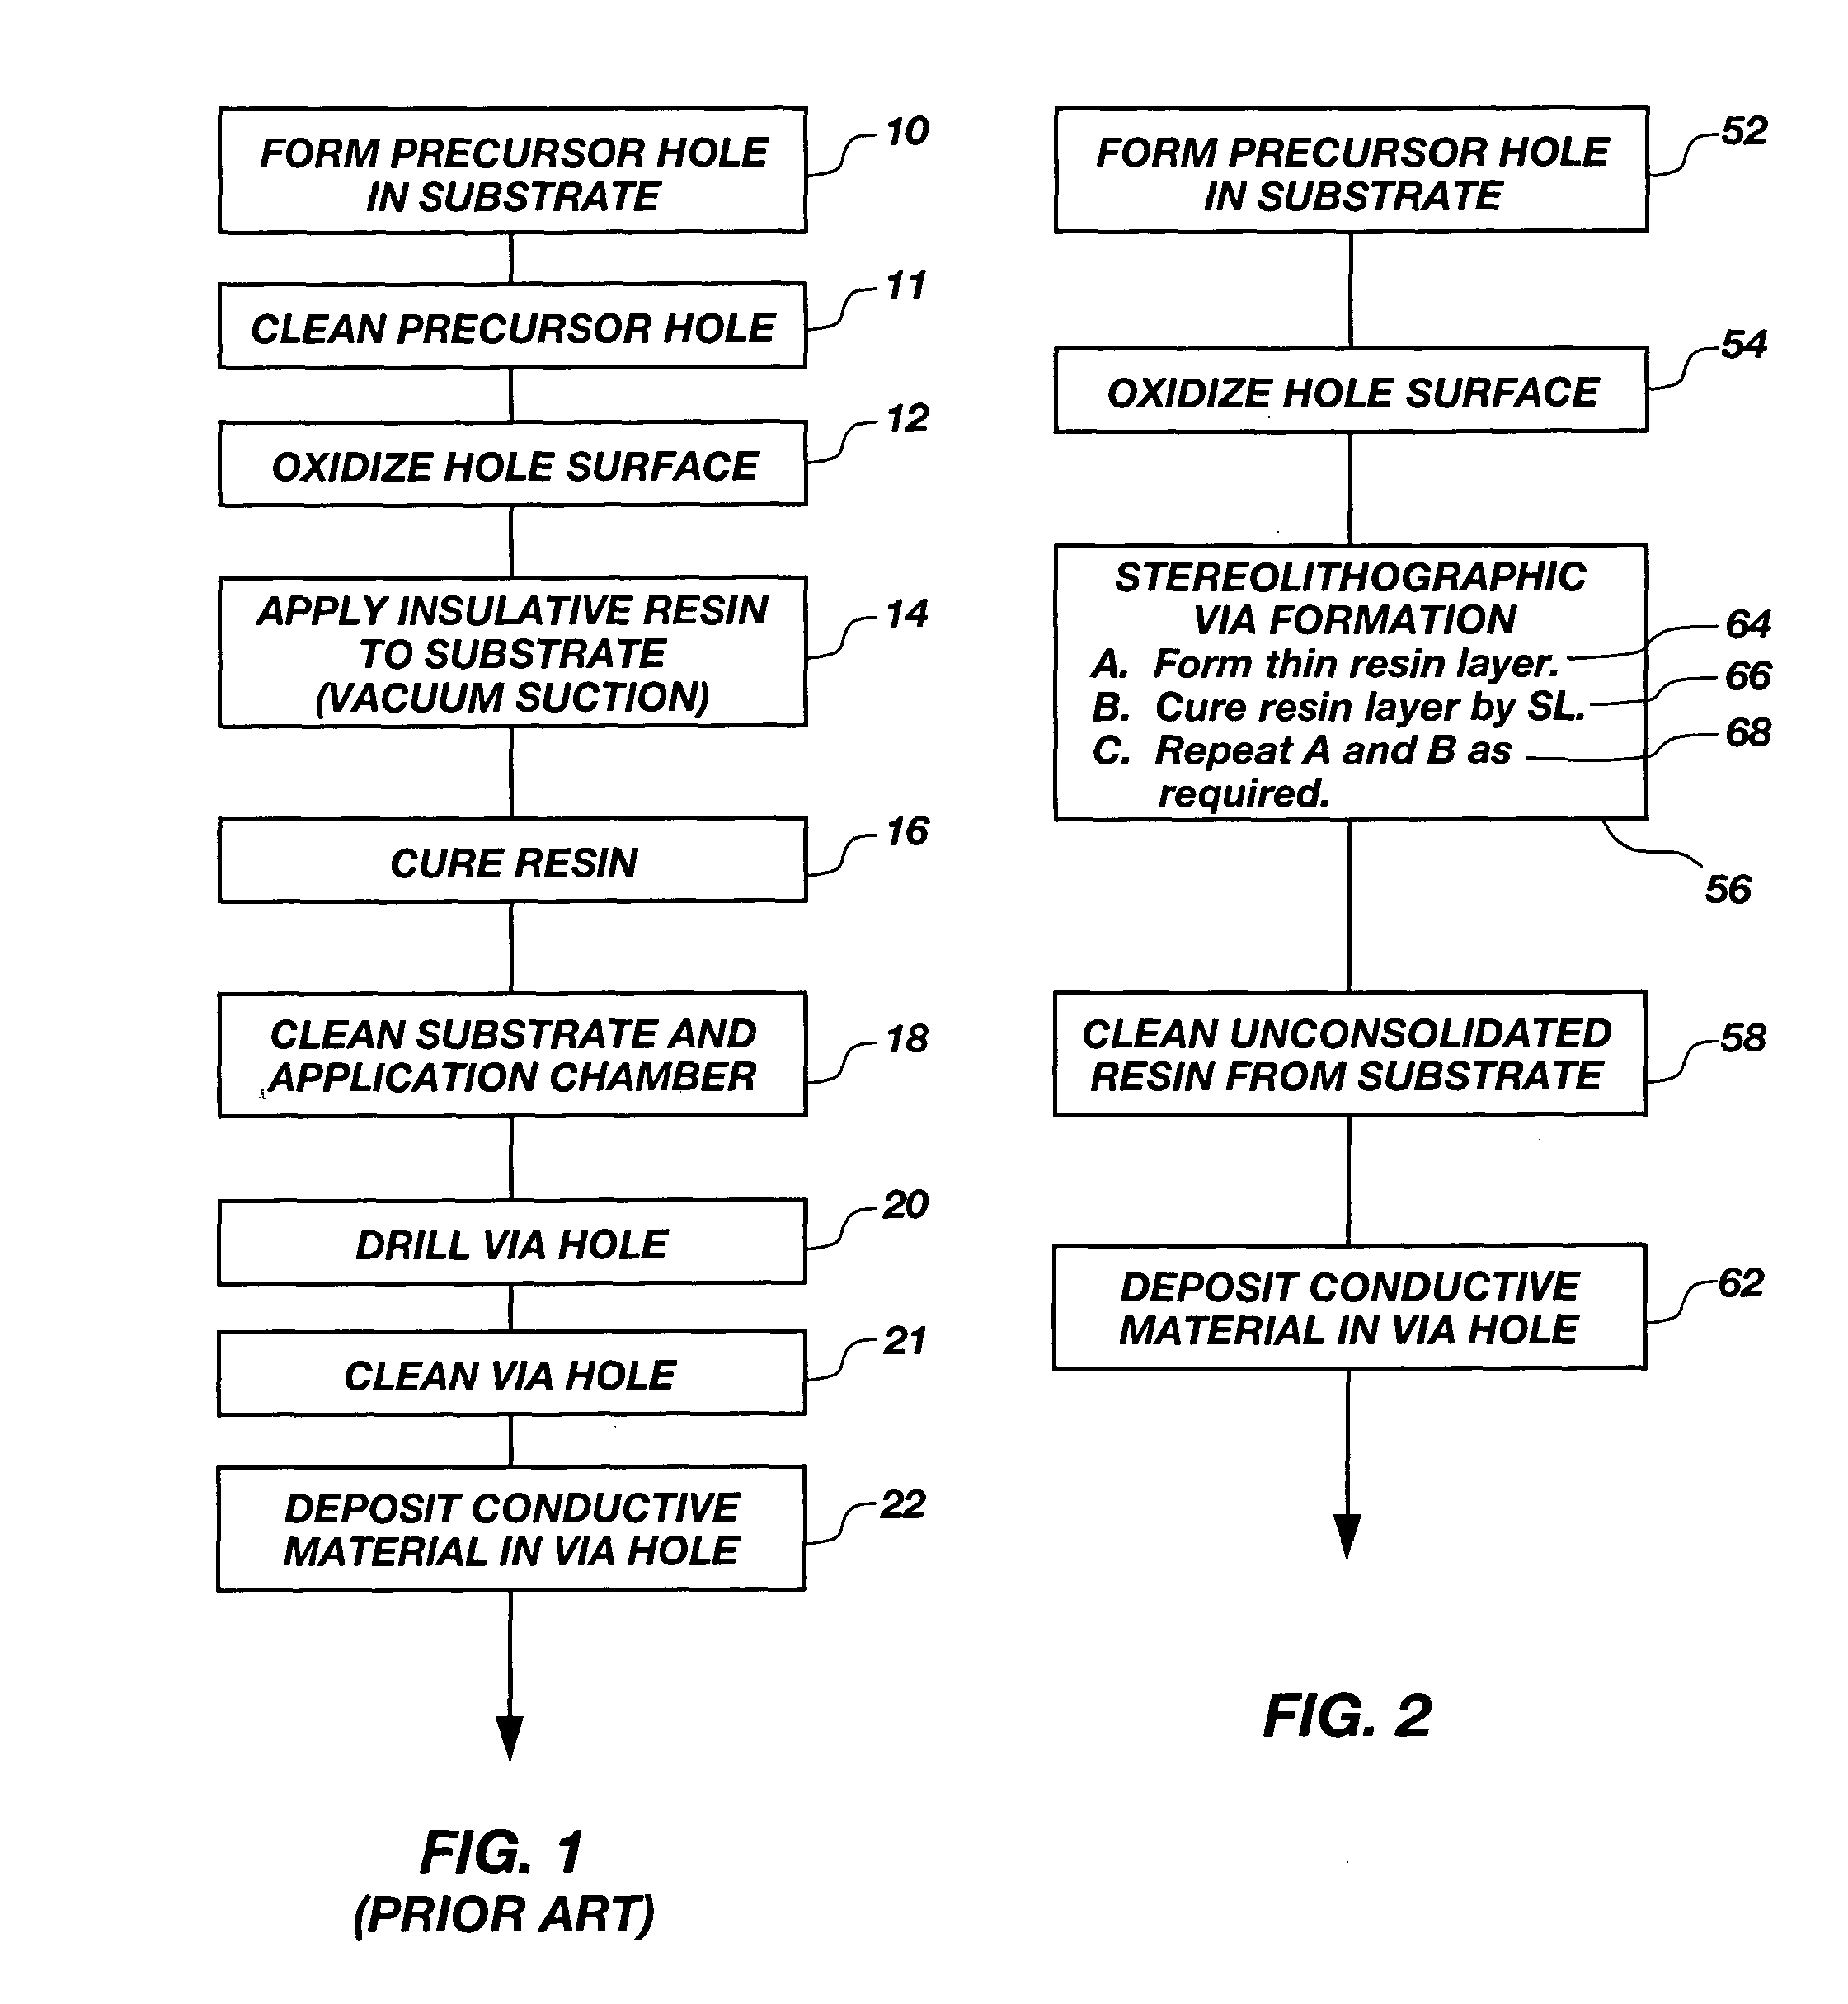 Stereolithographic method for forming insulative coatings for via holes in semiconductor devices, insulative coatings so formed, systems for forming the insulative coatings, and semiconductor devices including via holes with the insulative coatings